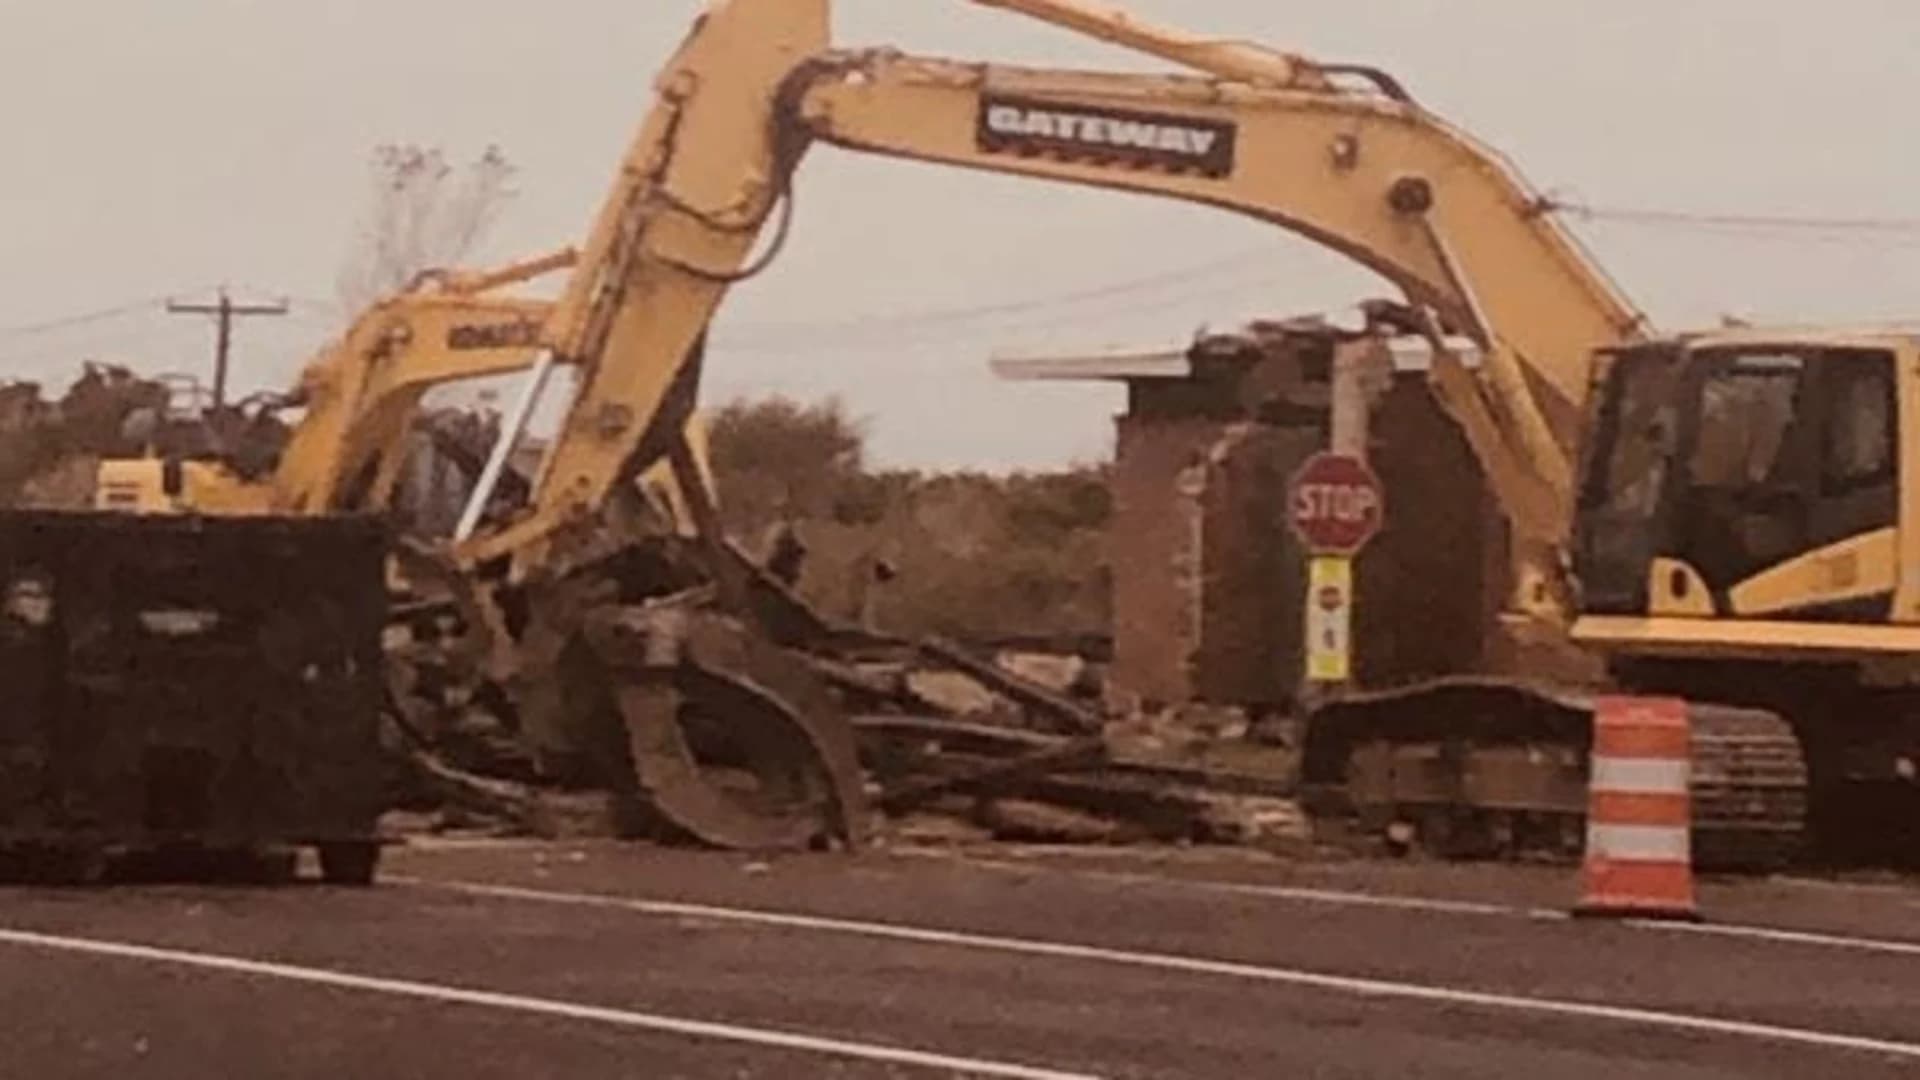 PHOTOS: Jones Beach toll booths on Wantagh Parkway demolished